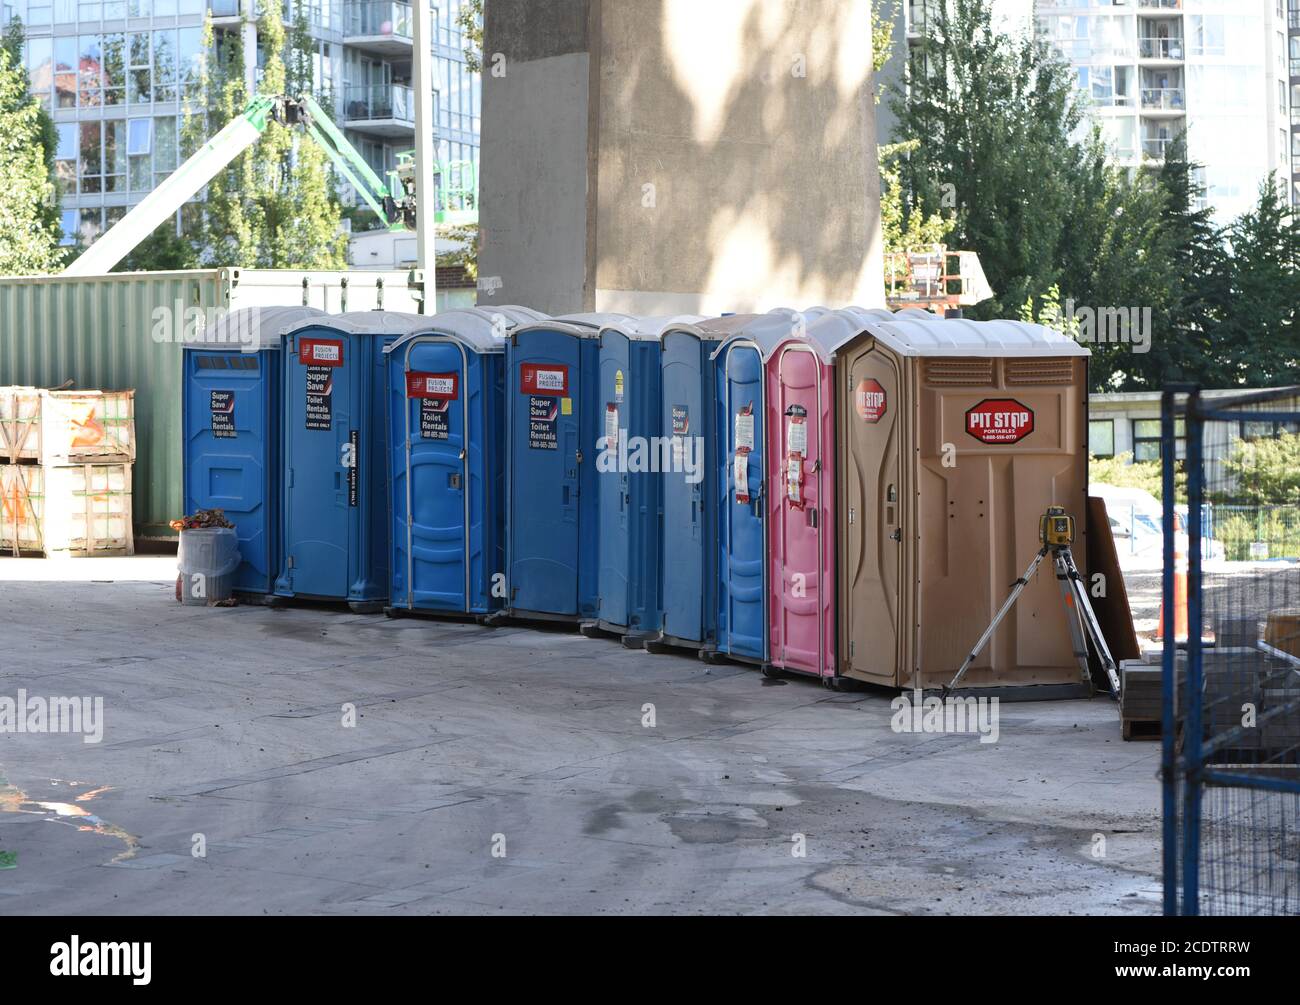 Portable toilets, blue, pink and brown, are lined up for use at a construction work site in Vancouver, British Columbia, Canada. The pink toilets are Stock Photo